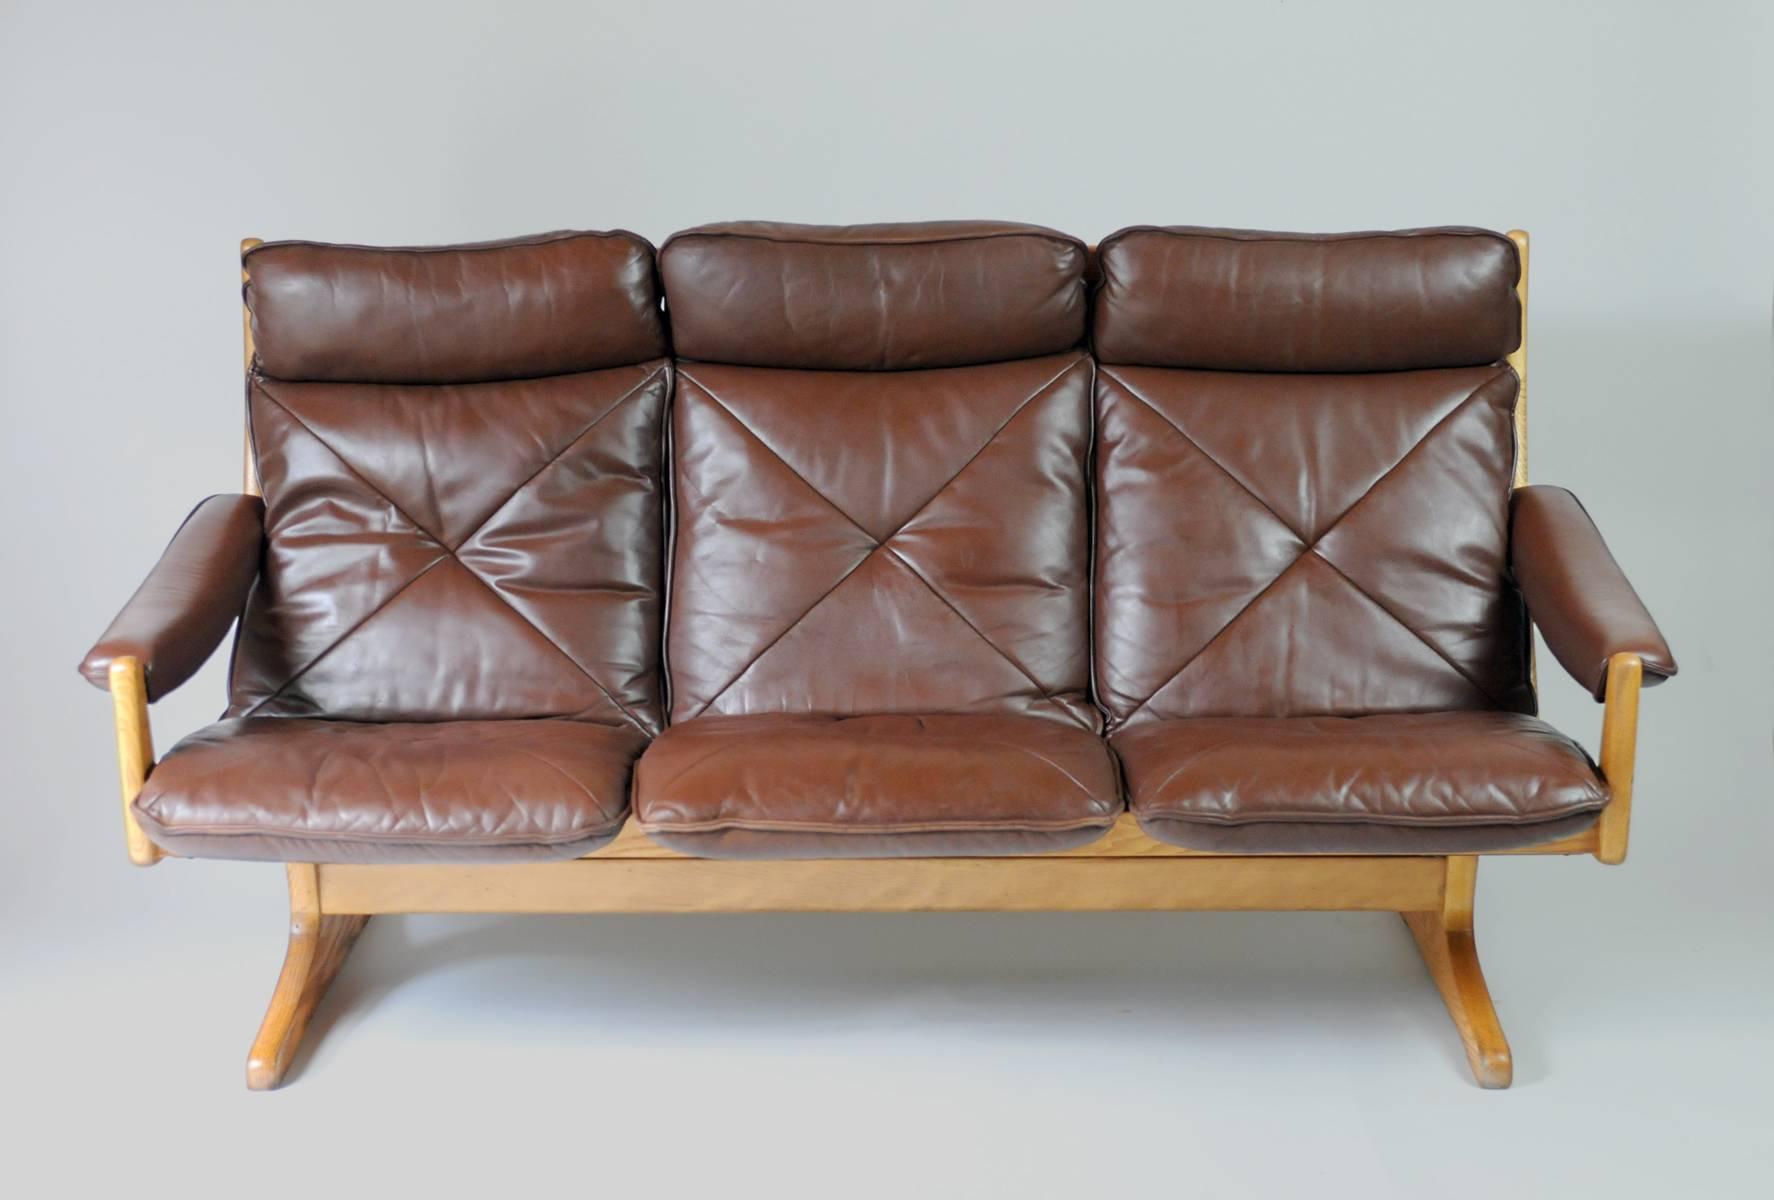 This solid ash and leather three-seater sofa was produced in Norway by Soda Galvano during the 1960s. It features a solid ash frame and patinated leather upholstery. Comfortable and solidly built, this sofa has been restored.